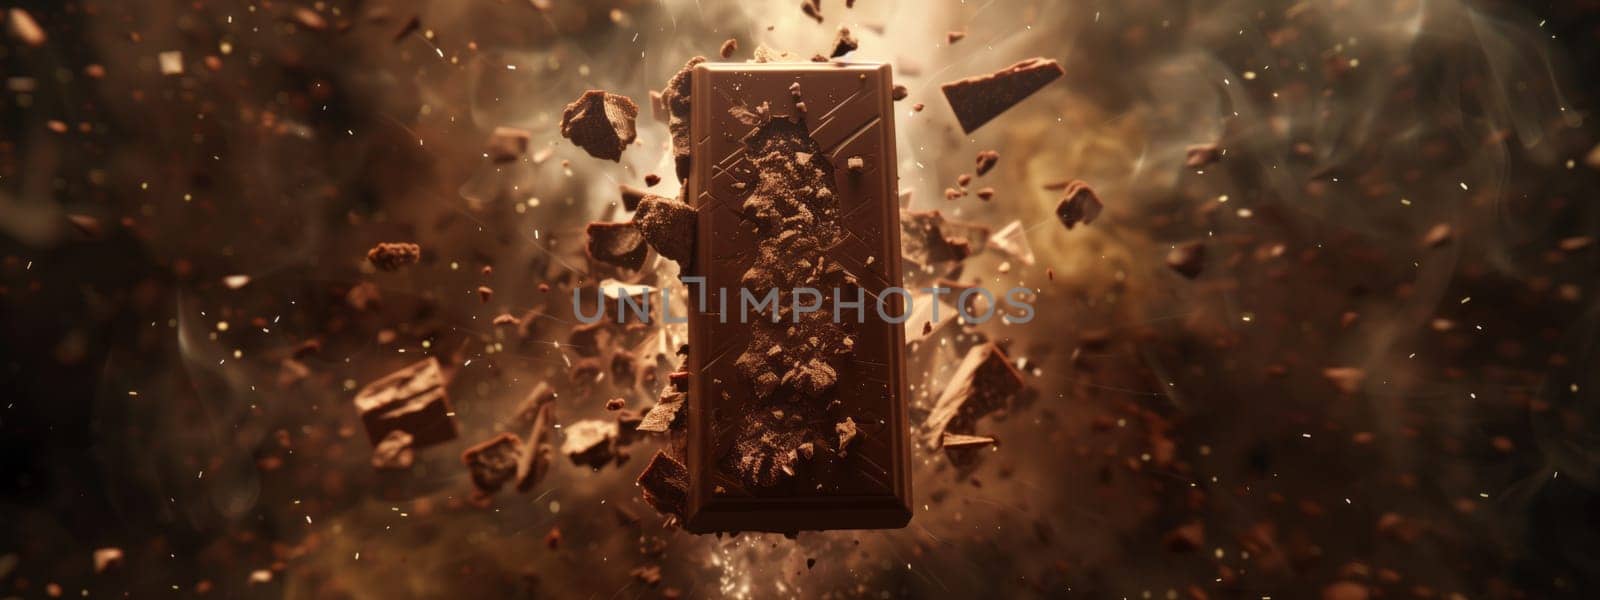 A chocolate bar explodes in a dark room, creating a messy yet artistic landscape reminiscent of a historic wood carving depicting terrestrial animals